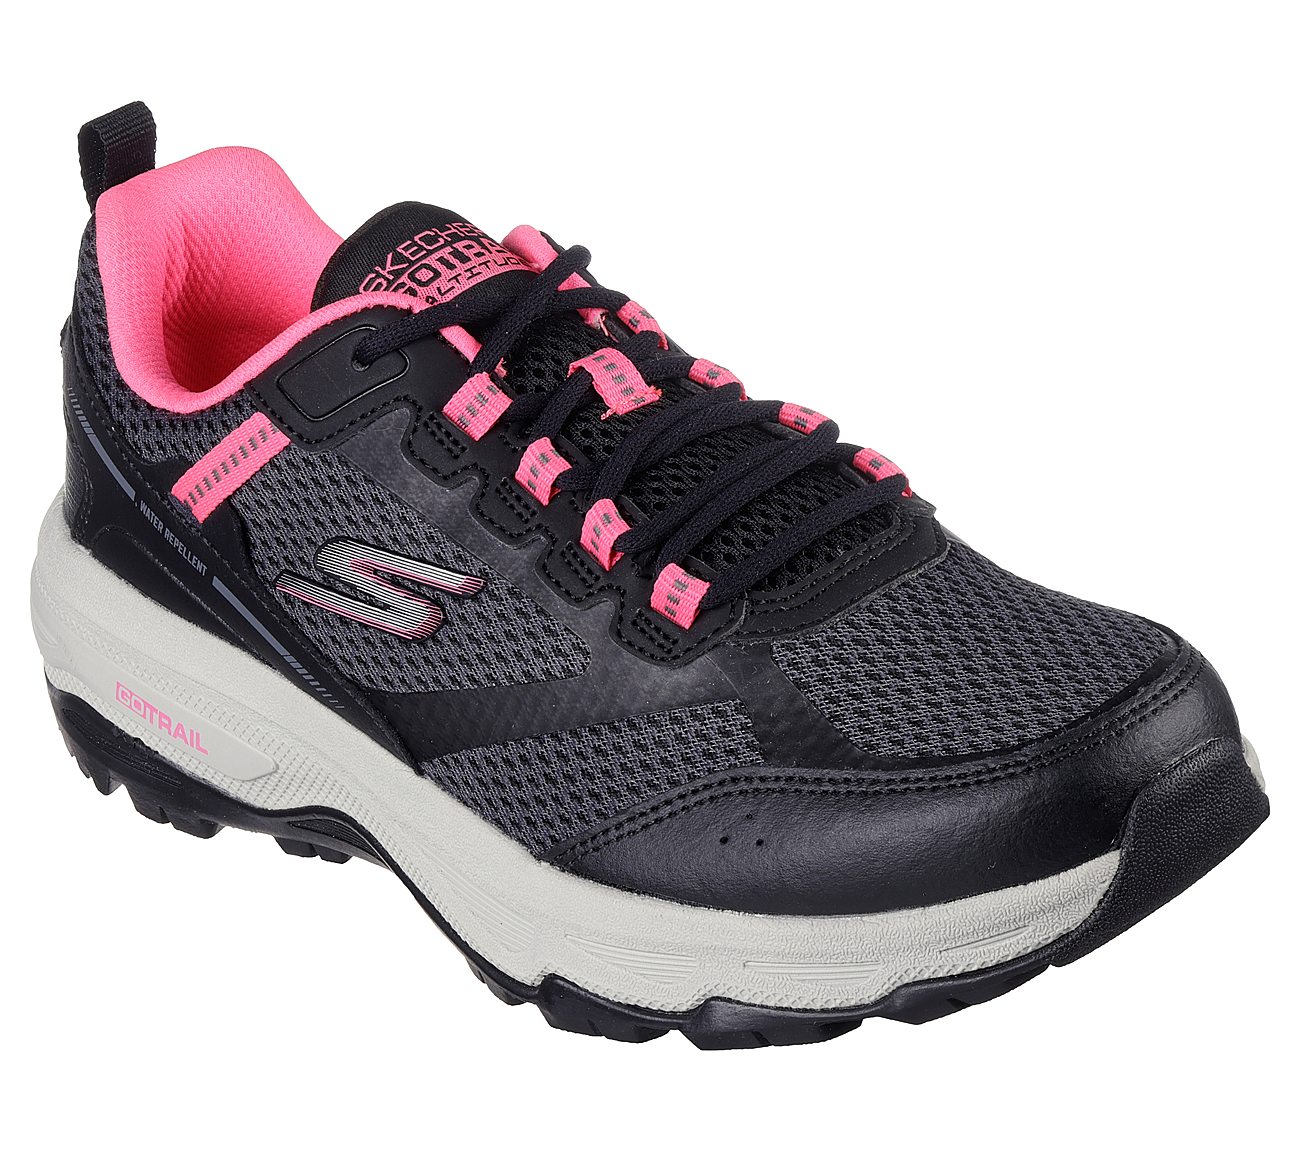 GO RUN TRAIL ALTITUDE, BLACK/PINK Footwear Lateral View